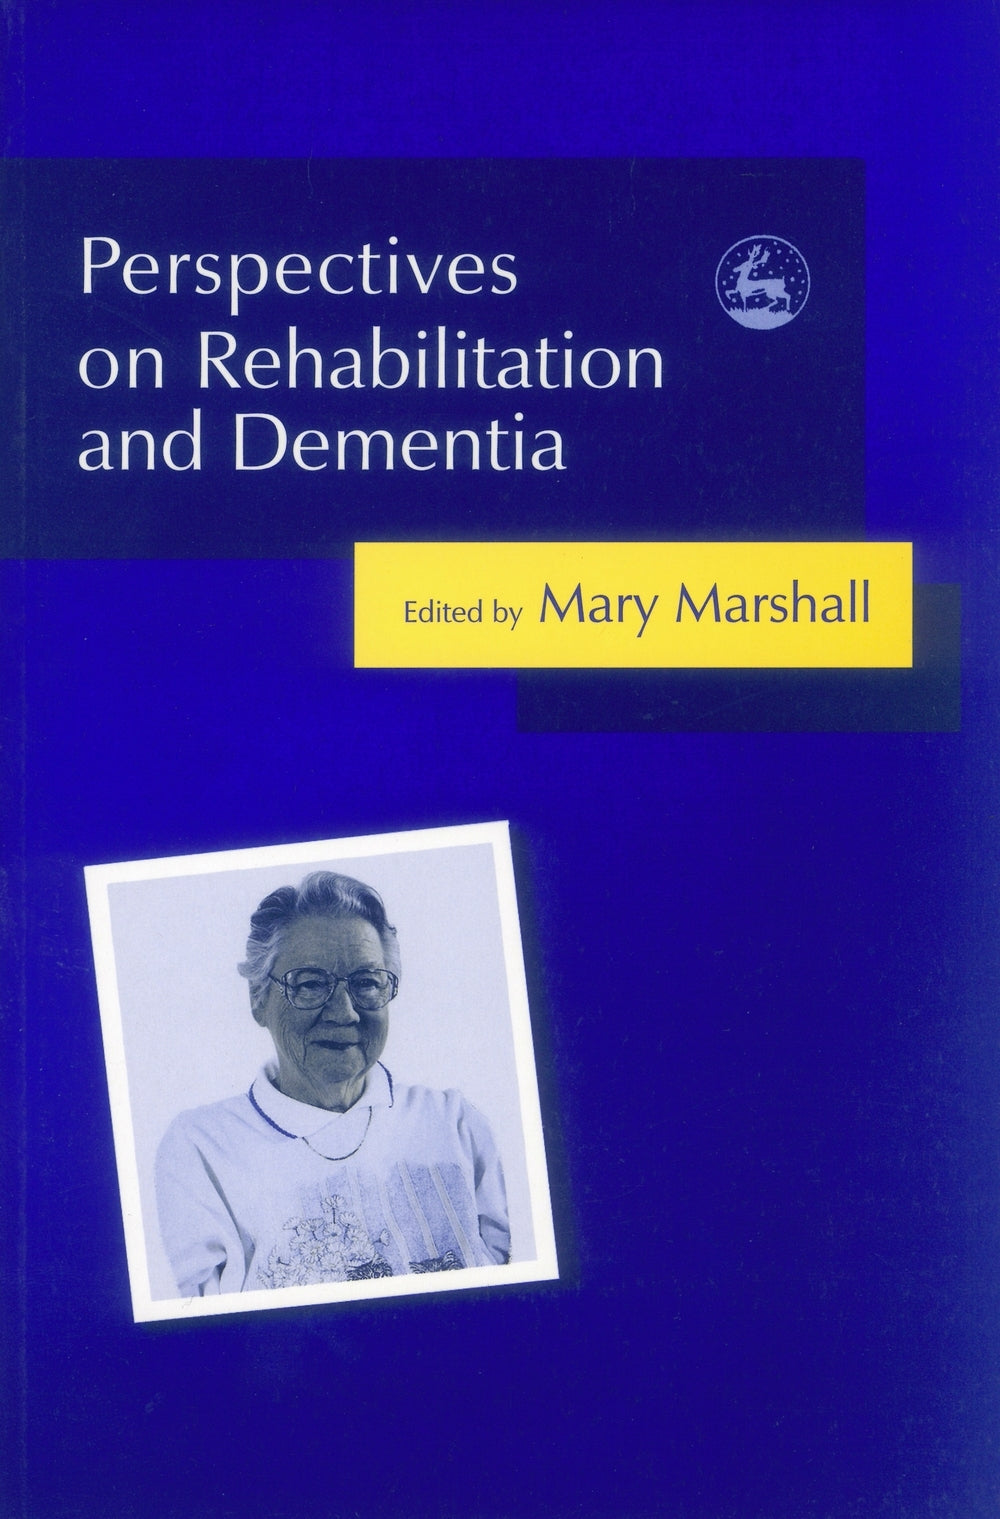 Perspectives on Rehabilitation and Dementia by Professor Mary Marshall